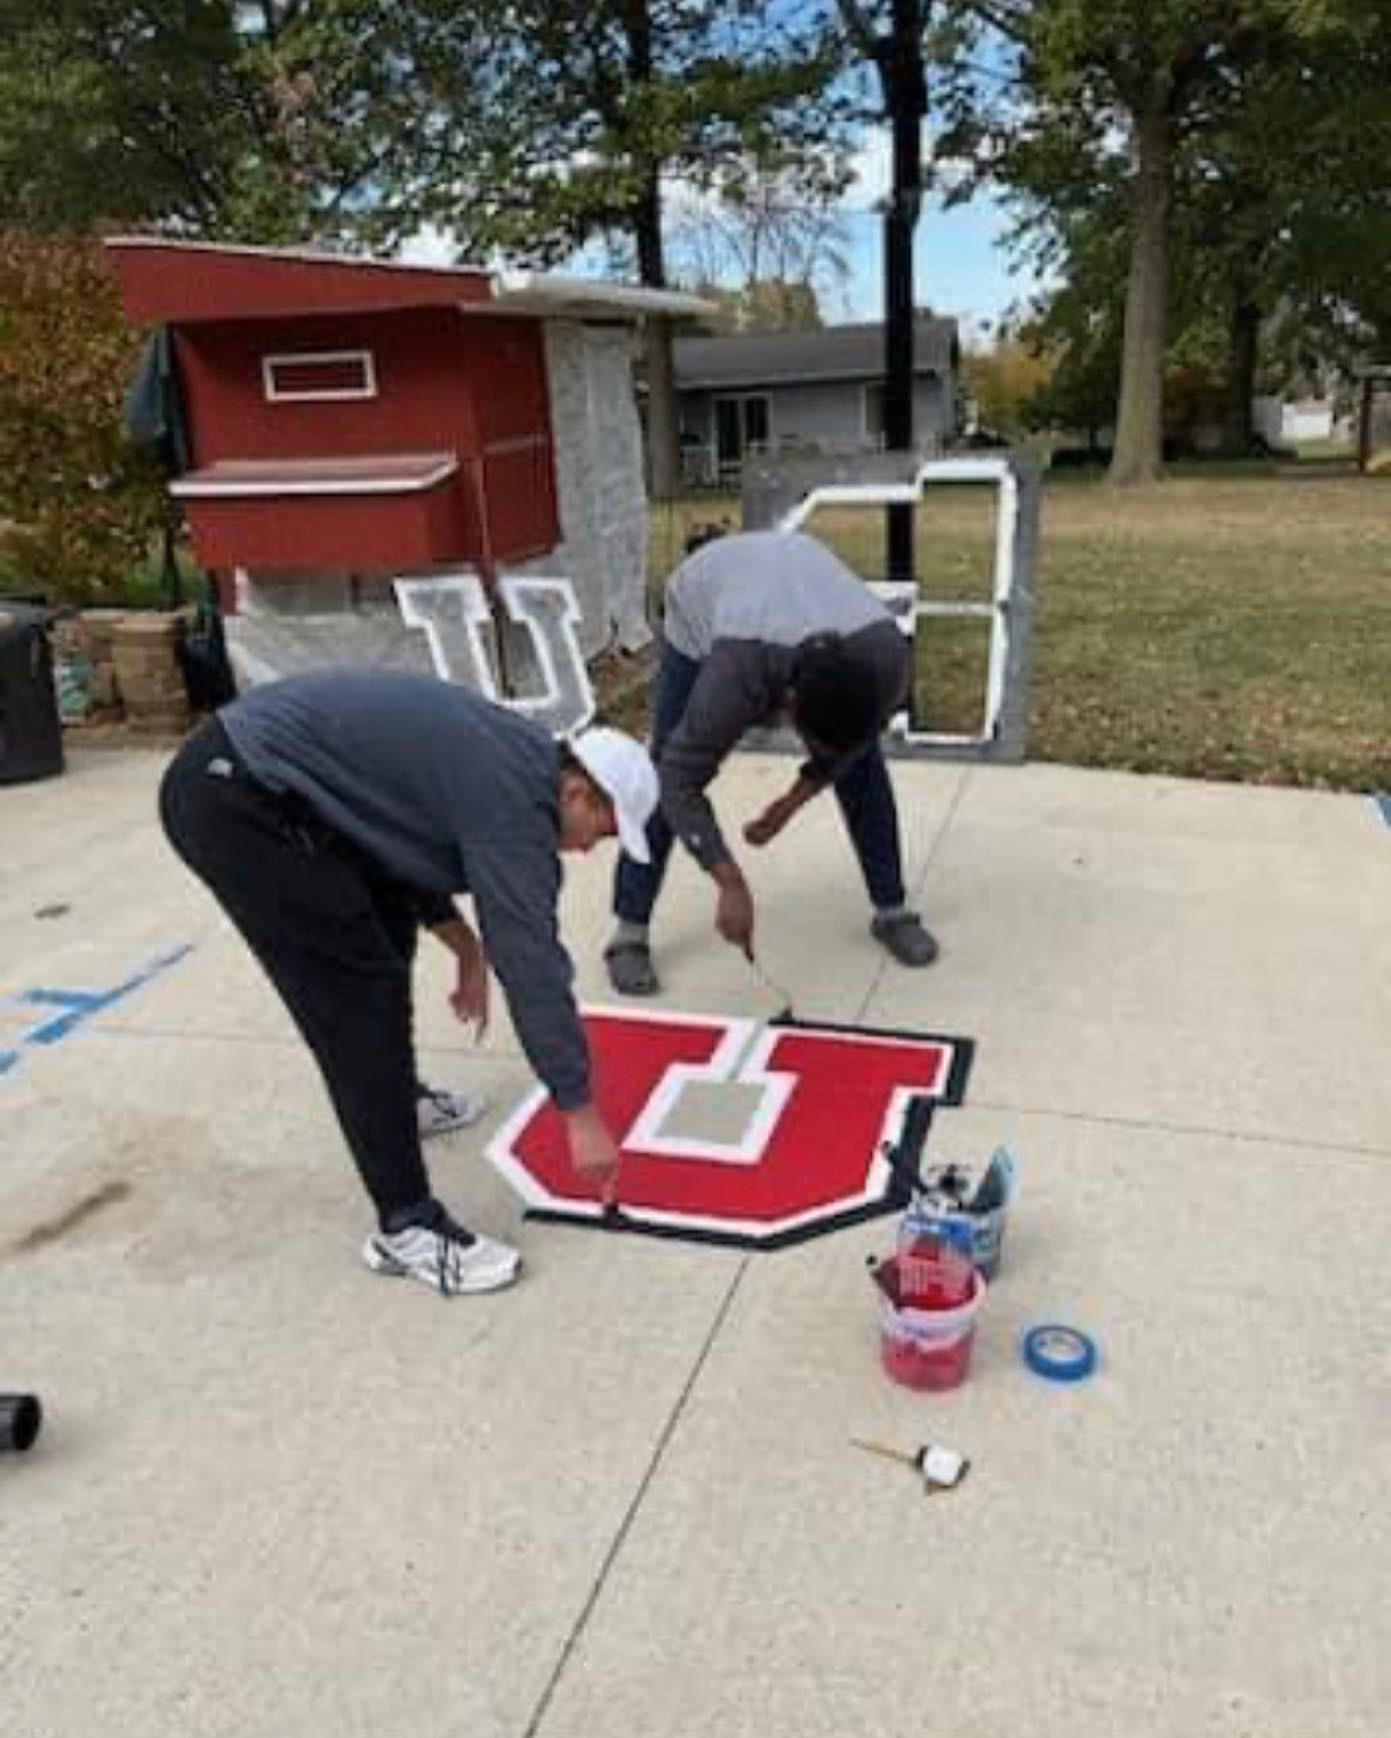 Two boys painting a school logo